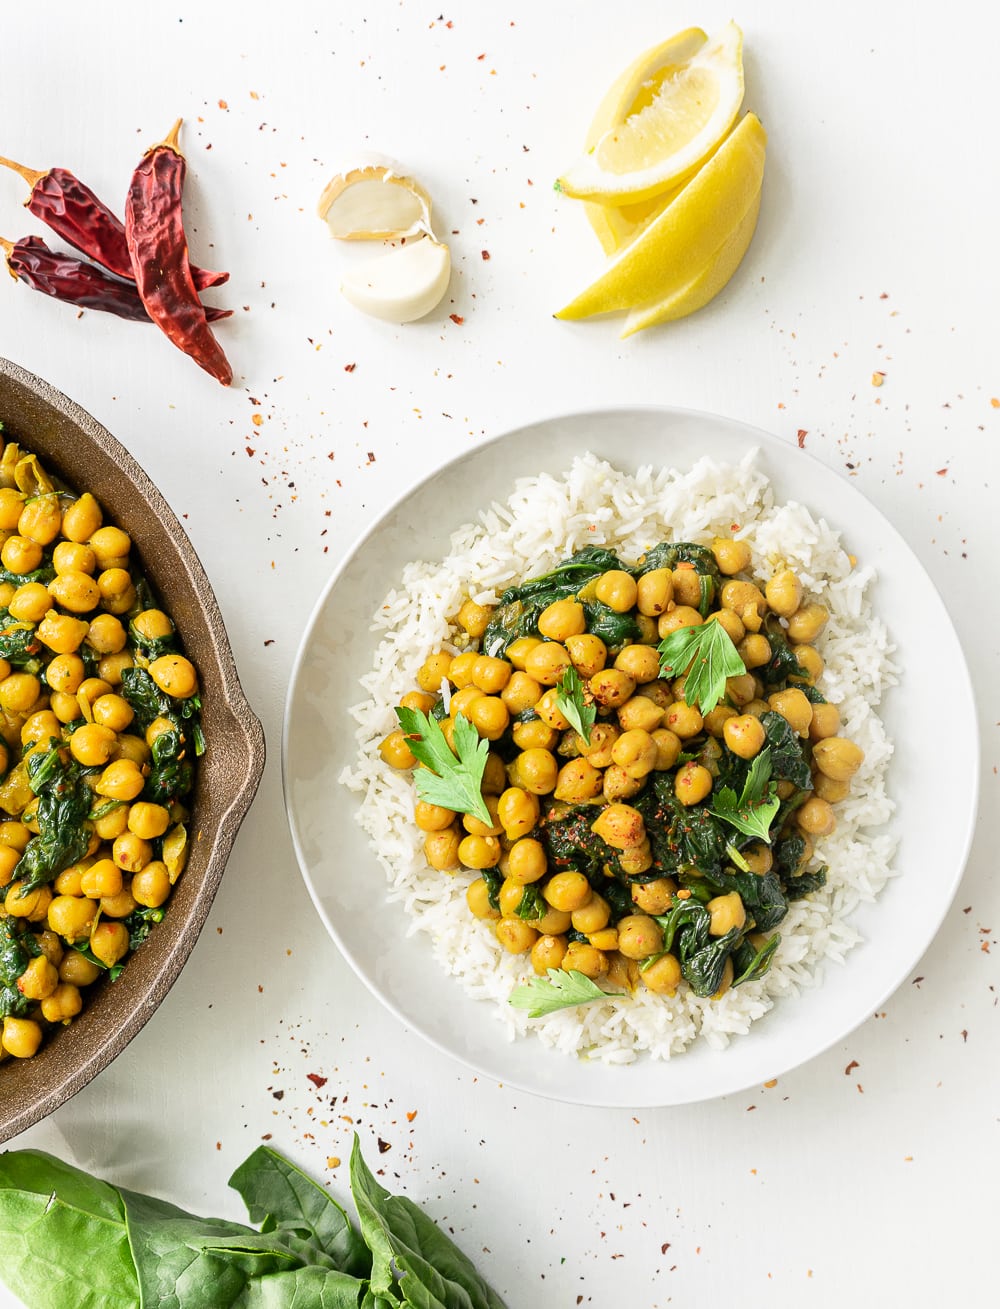 A plate with basmati rice and delicious spinach and chickpea curry ready to eat.